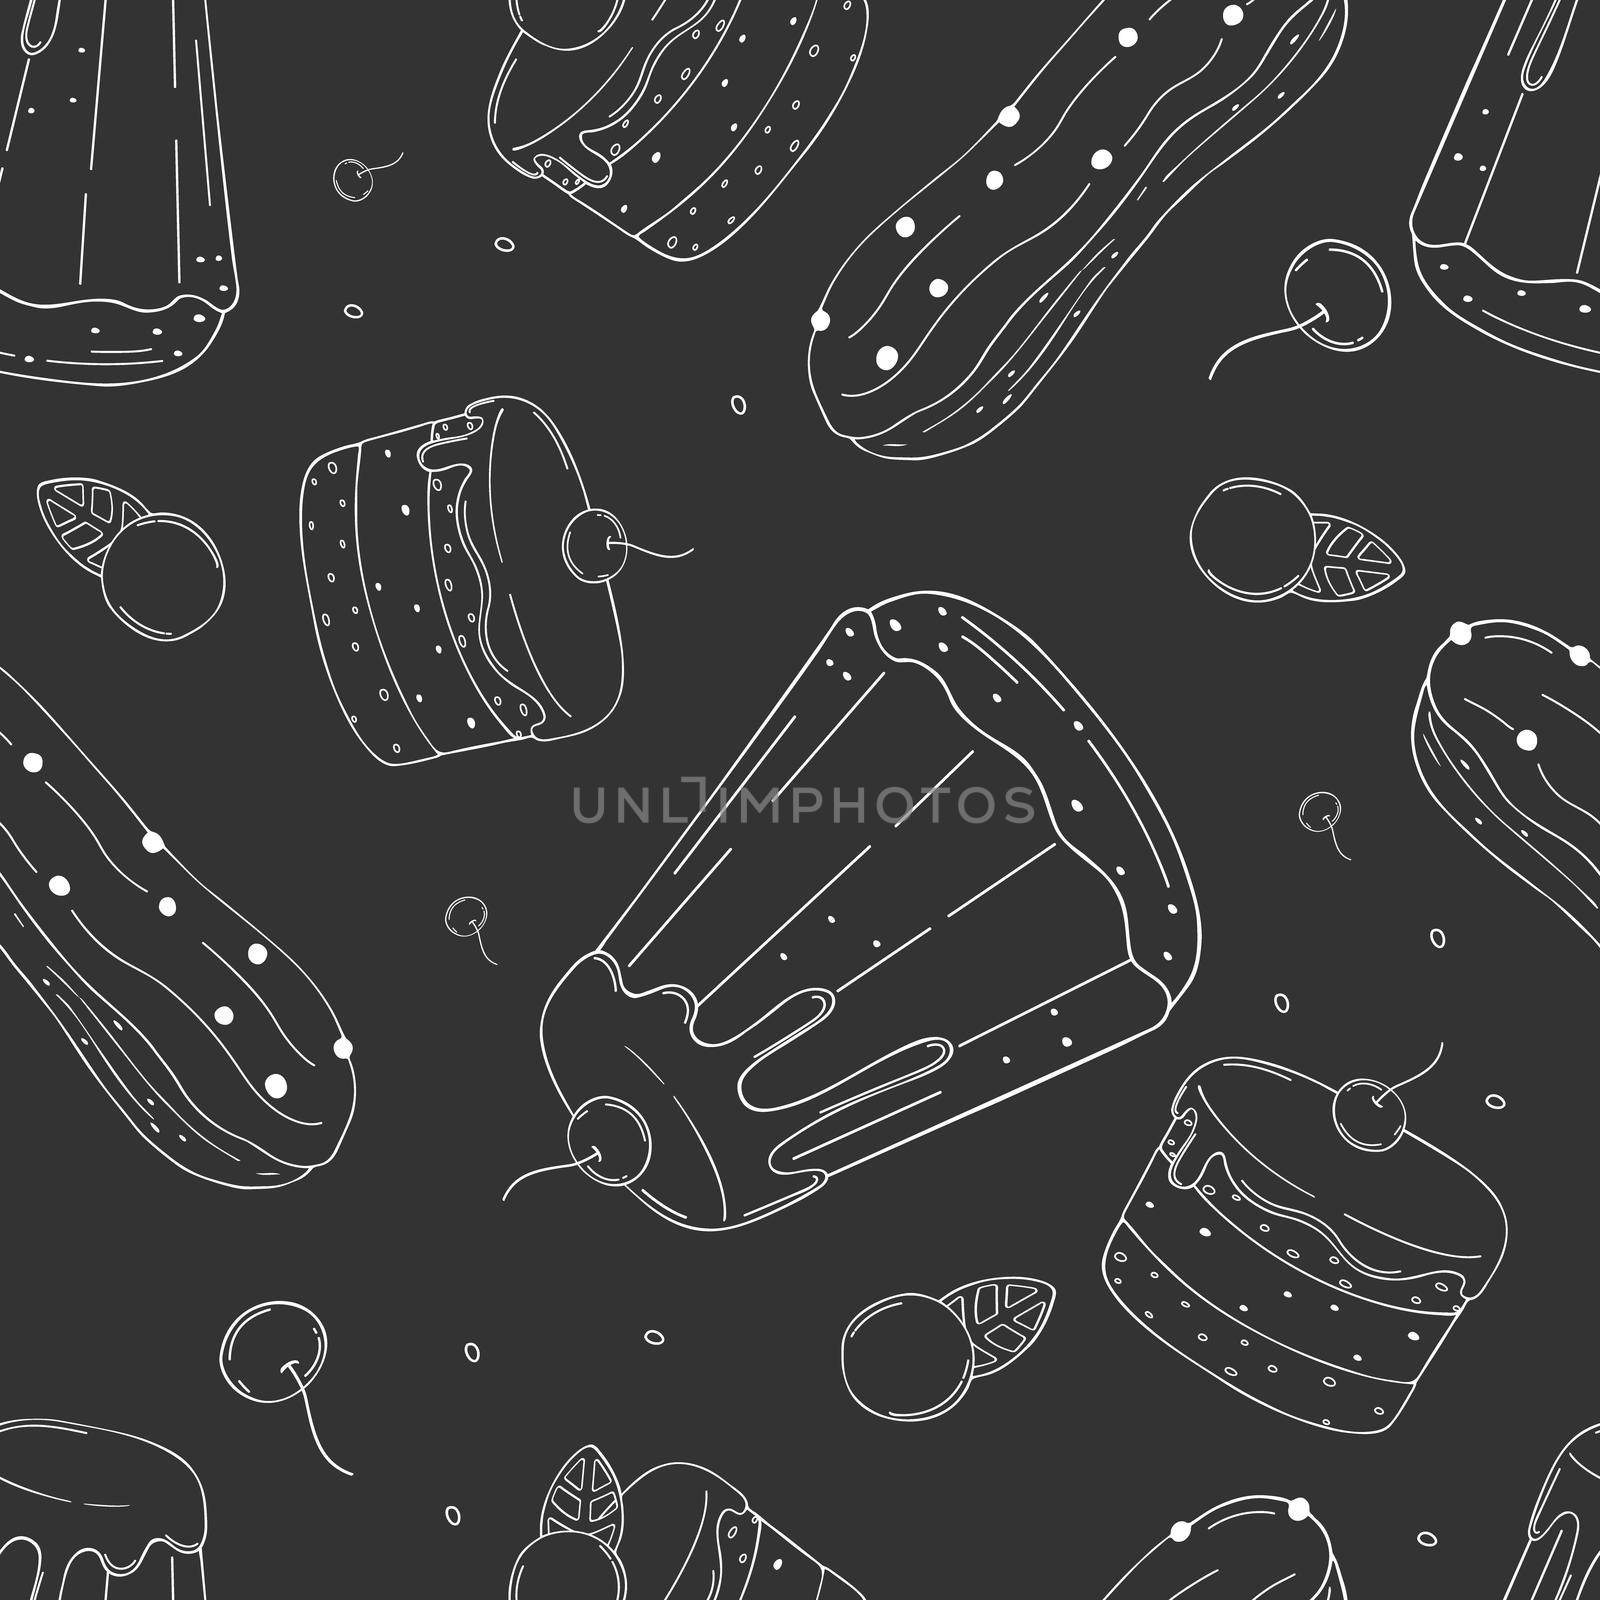 Seamless pattern of elements with hand drawn pastry on chalkboard background. Vector icons in black and white sketch style. Hand drawn isolated objects.